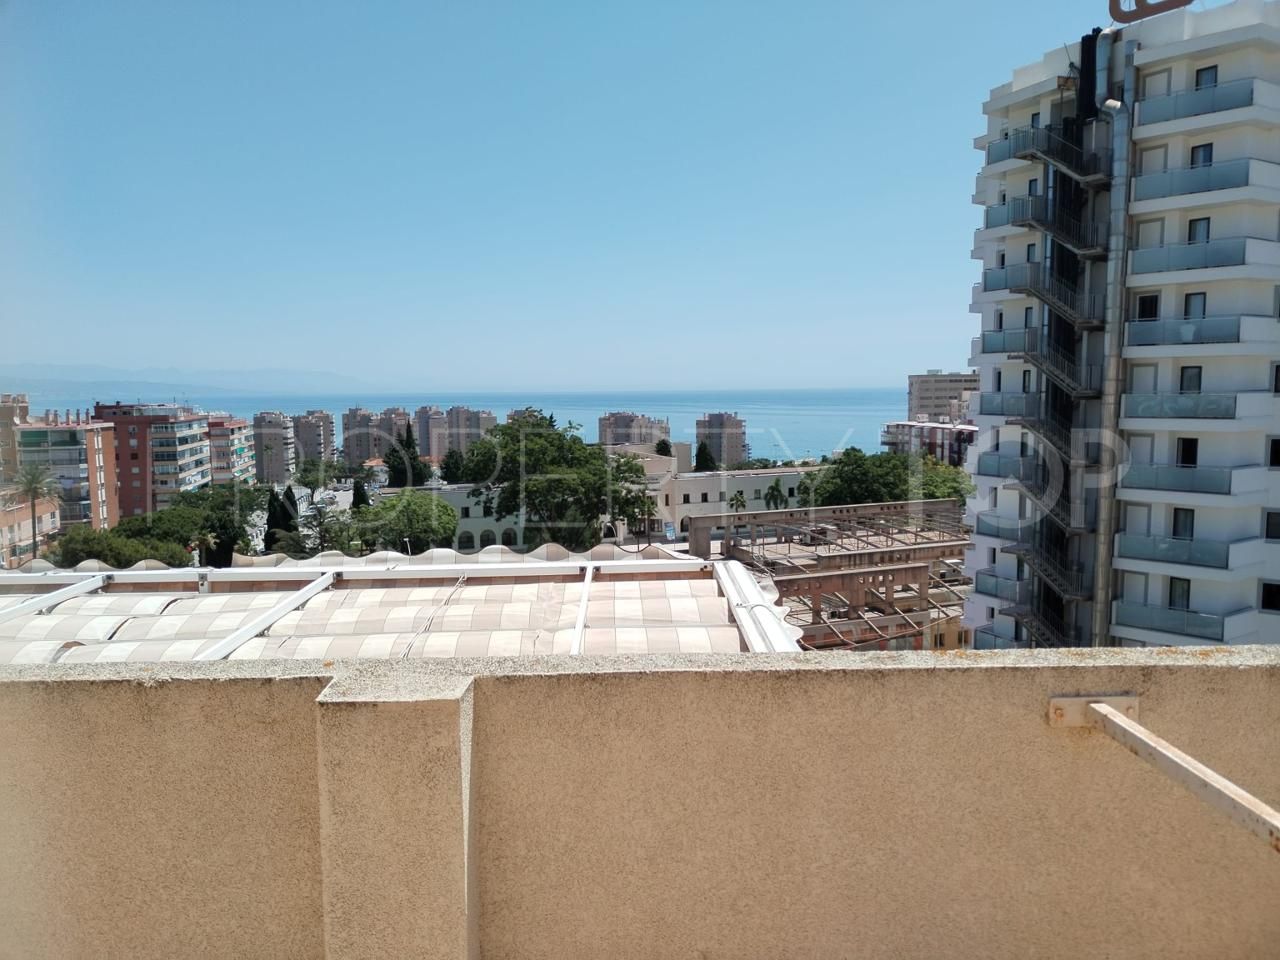 For sale Torremolinos Centro flat with 3 bedrooms